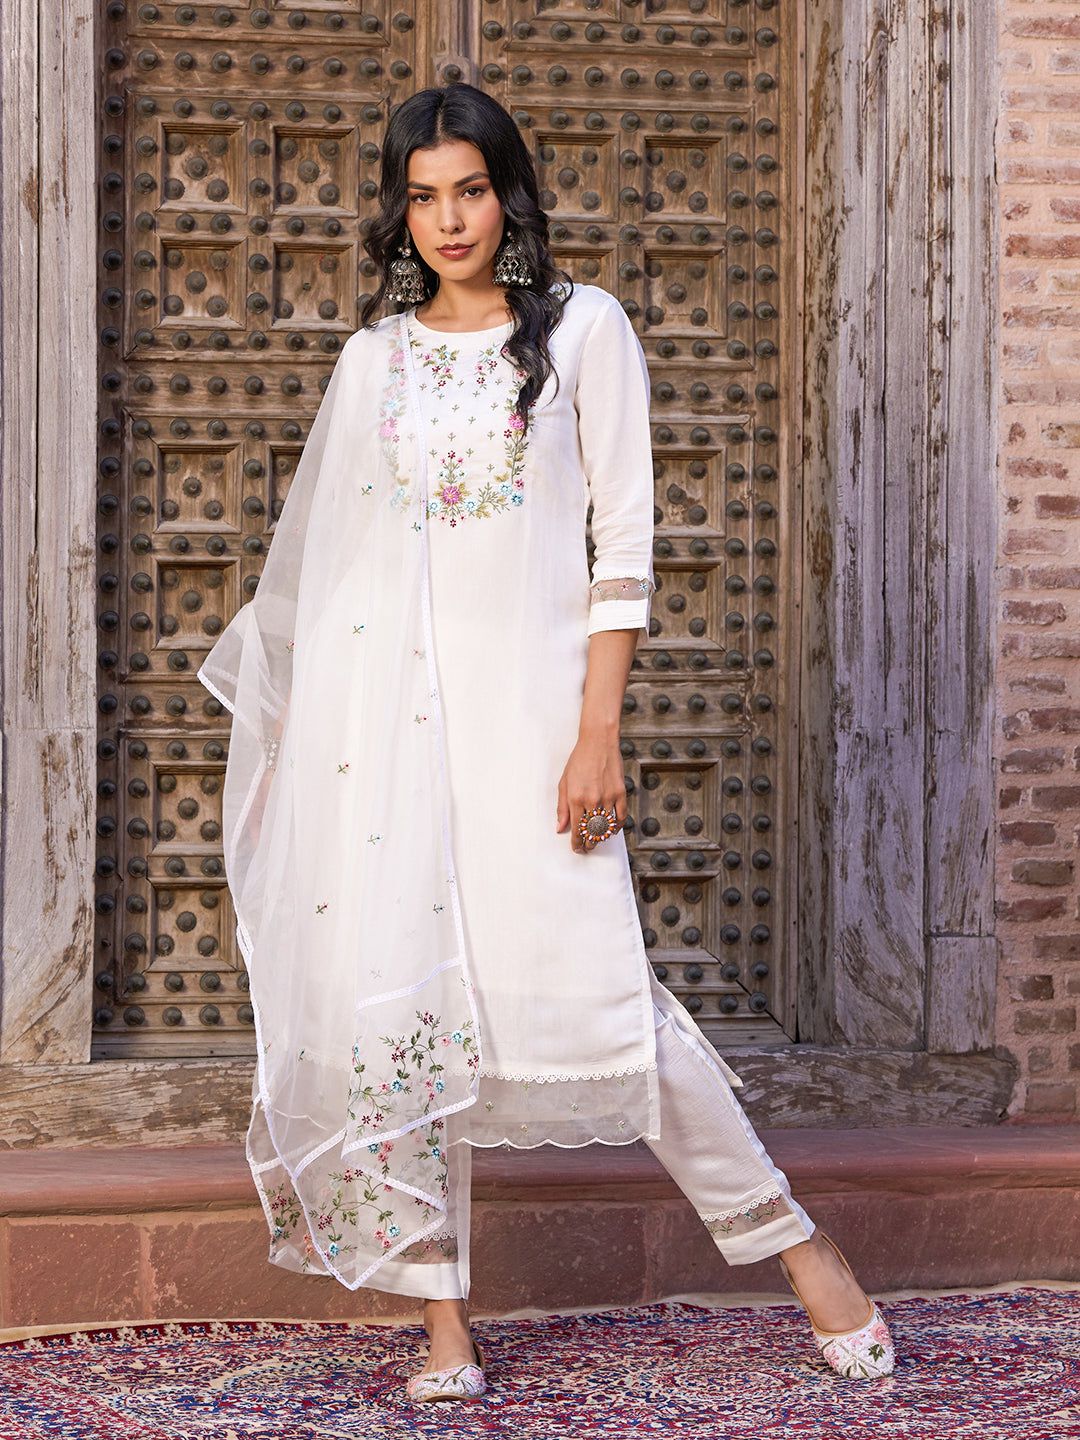     			SAREEKART FAB Viscose Embroidered Kurti With Pants Women's Stitched Salwar Suit - White ( Pack of 1 )